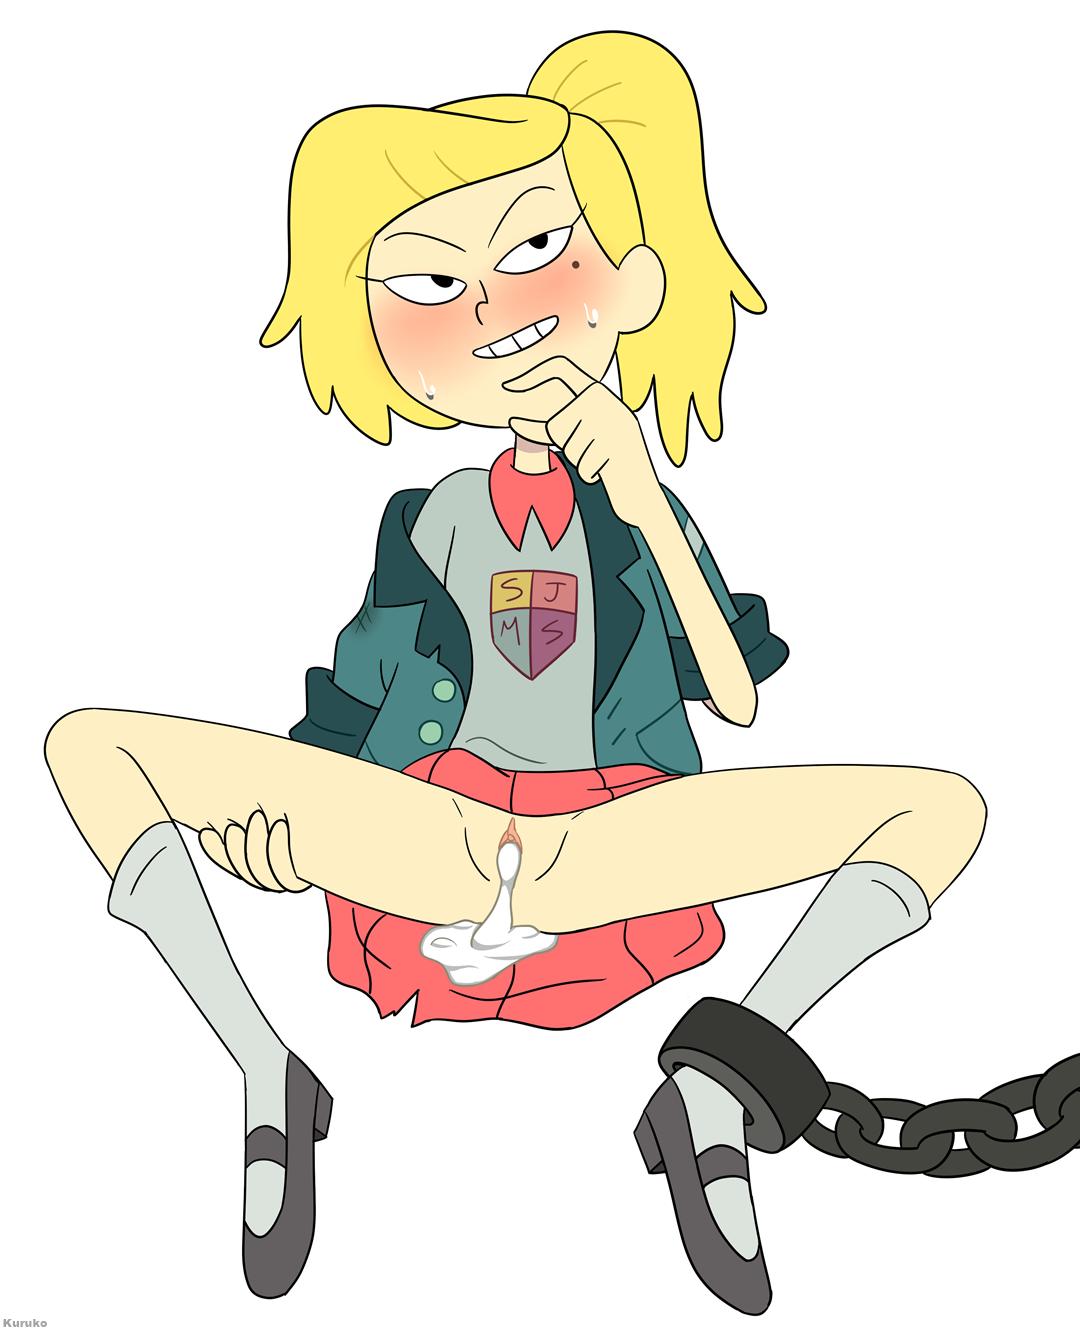 “its her 👀
#Amphibia #nsfw” 